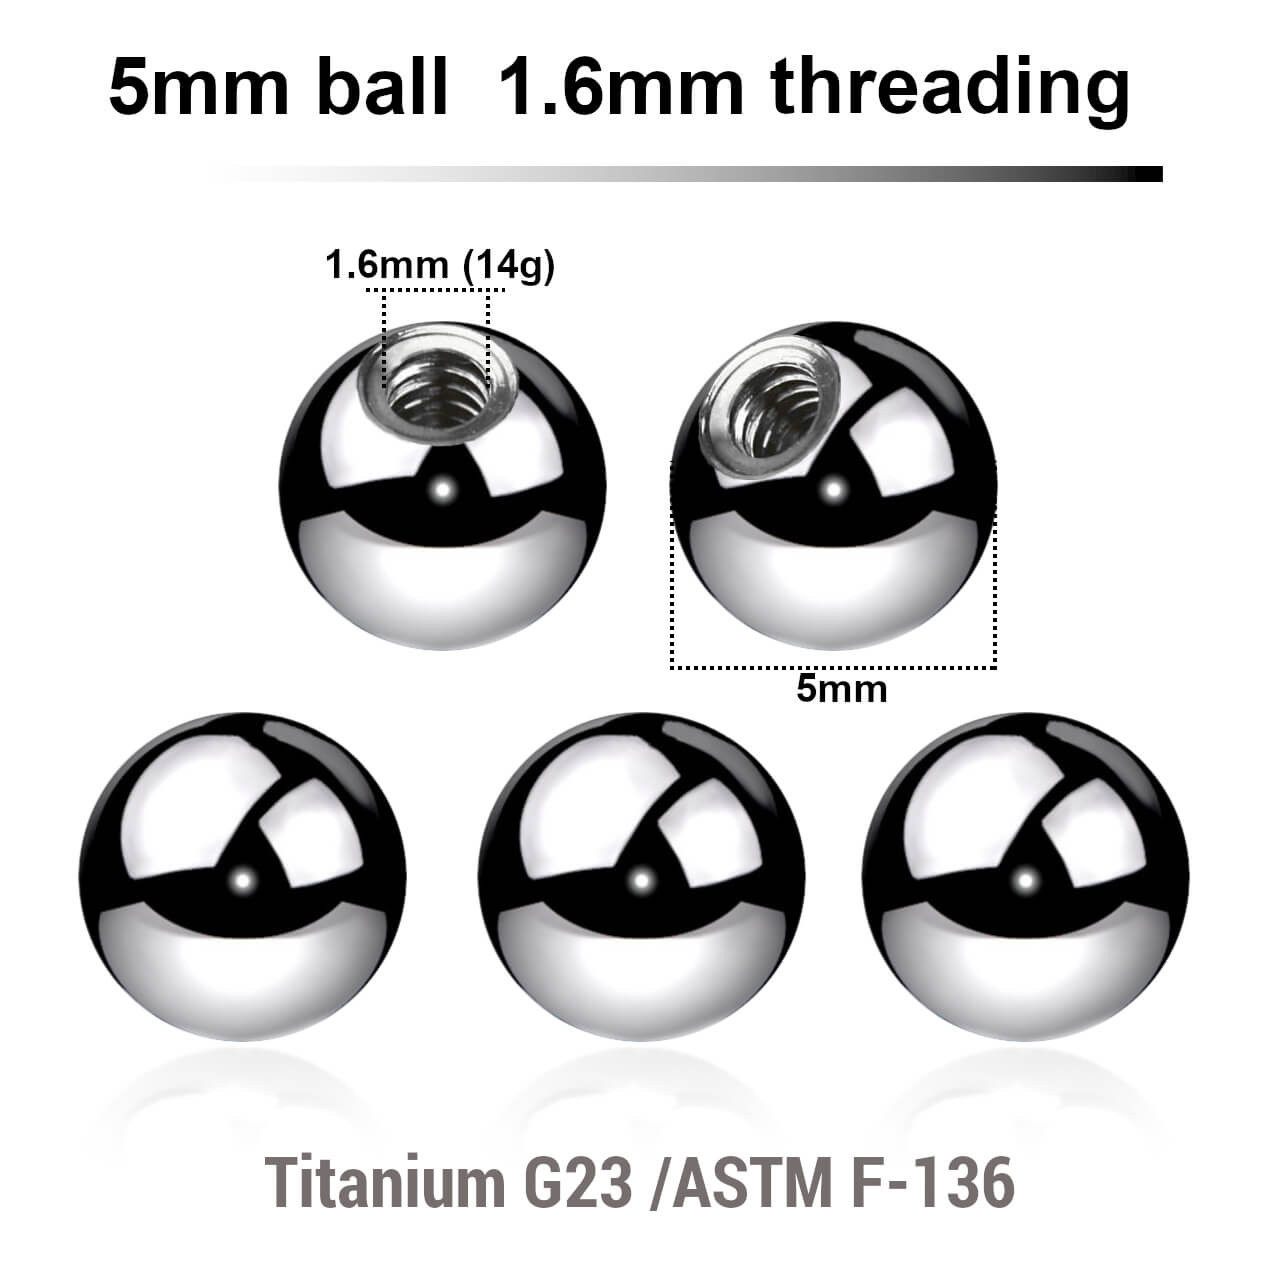 TYB16N5 Piercing studio supplies: Pack of 25 high polished titanium G23 balls with 5mm diameter and a 1.6mm threading